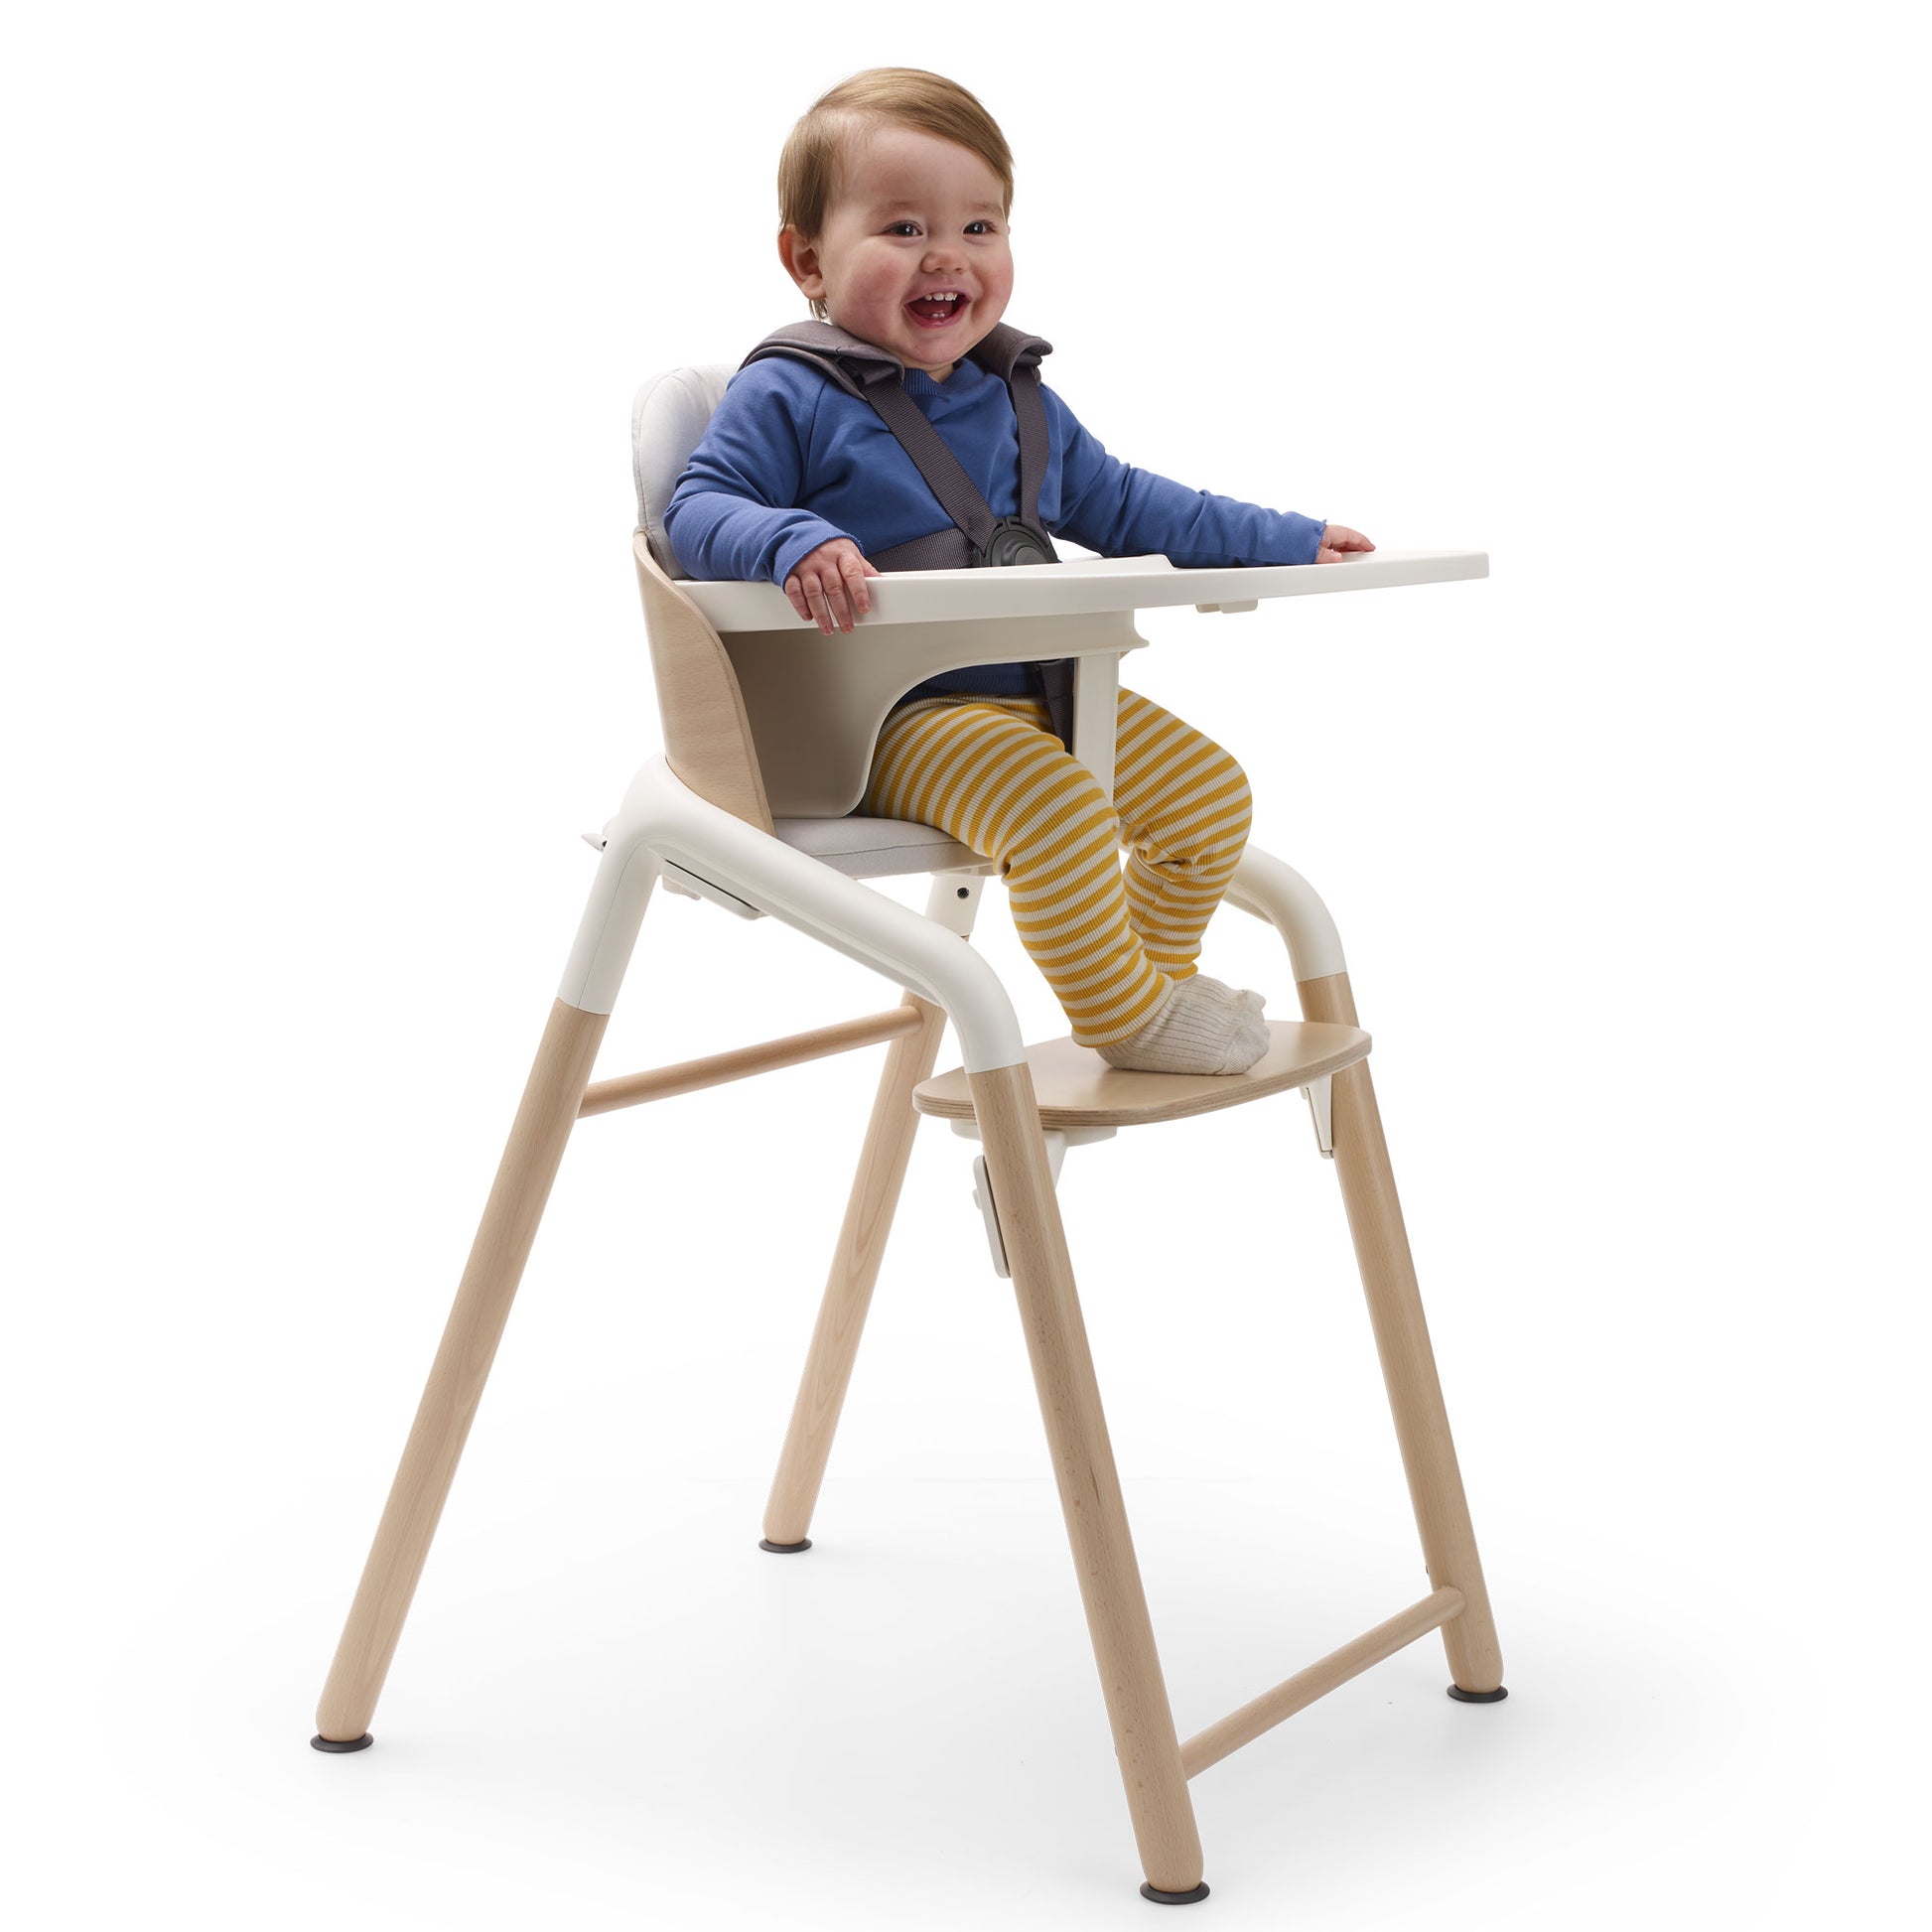 Baby sits in Bugaboo Giraffe High Chair Complete - Neutral Wood / White